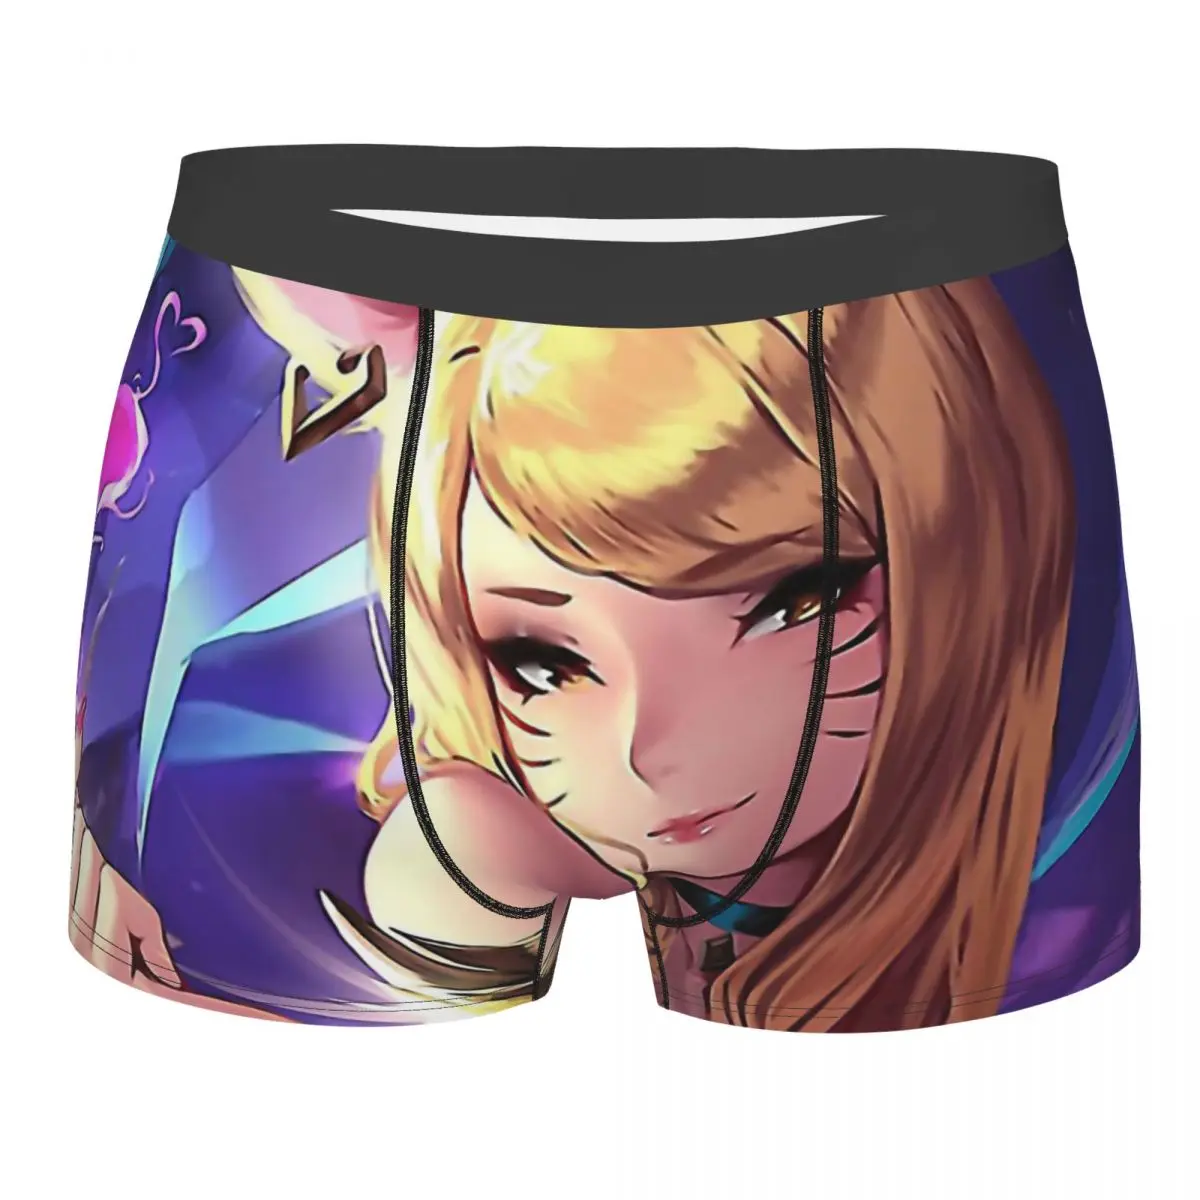 

Cool Man's Boxer Briefs League of Legends Game Highly Breathable Underpants High Quality Print Shorts Gift Idea